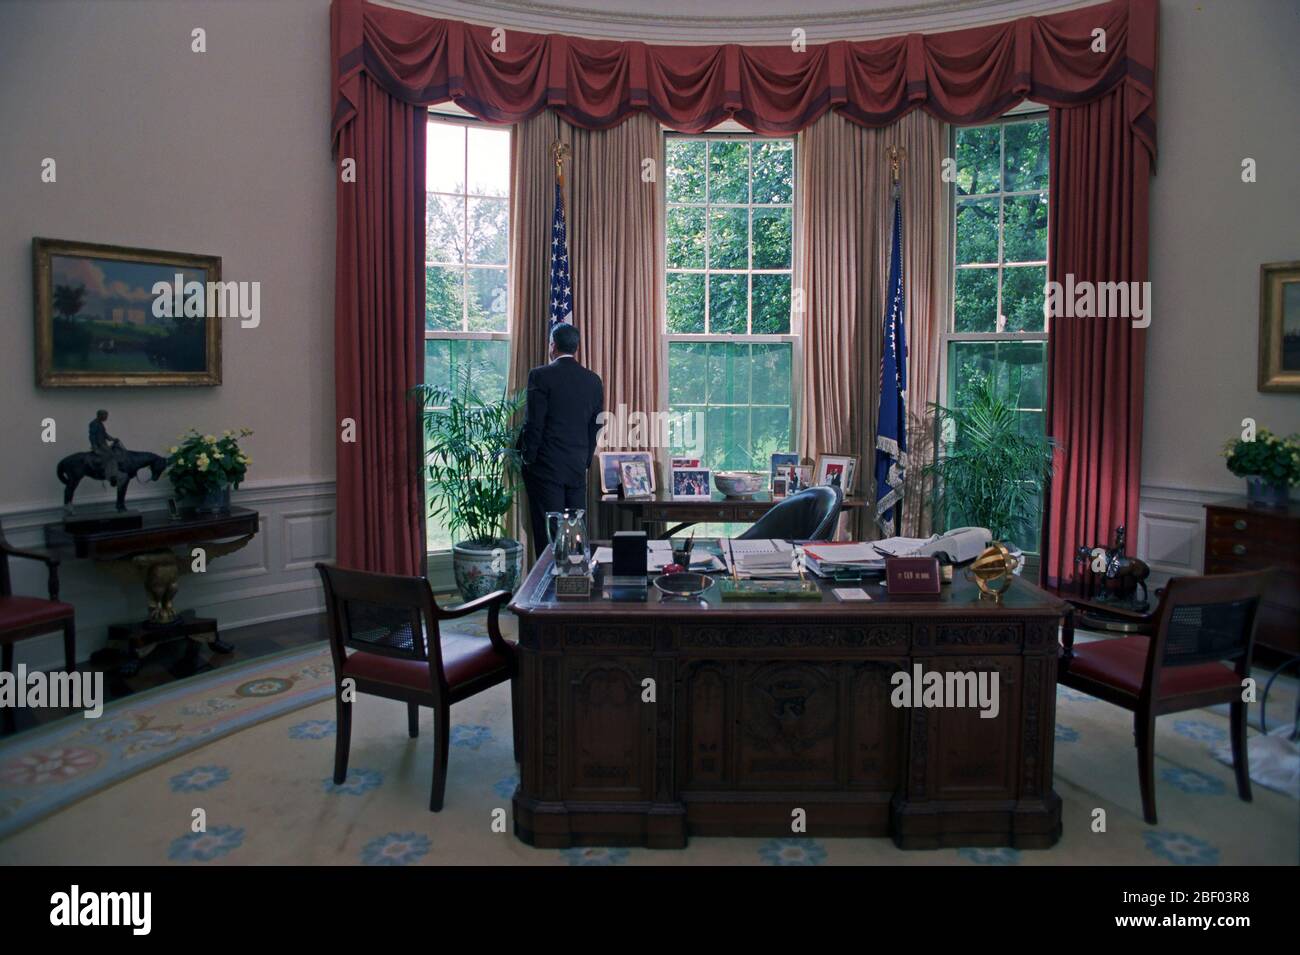 7/24/1984 President Reagan alone in the Oval Office Stock Photo